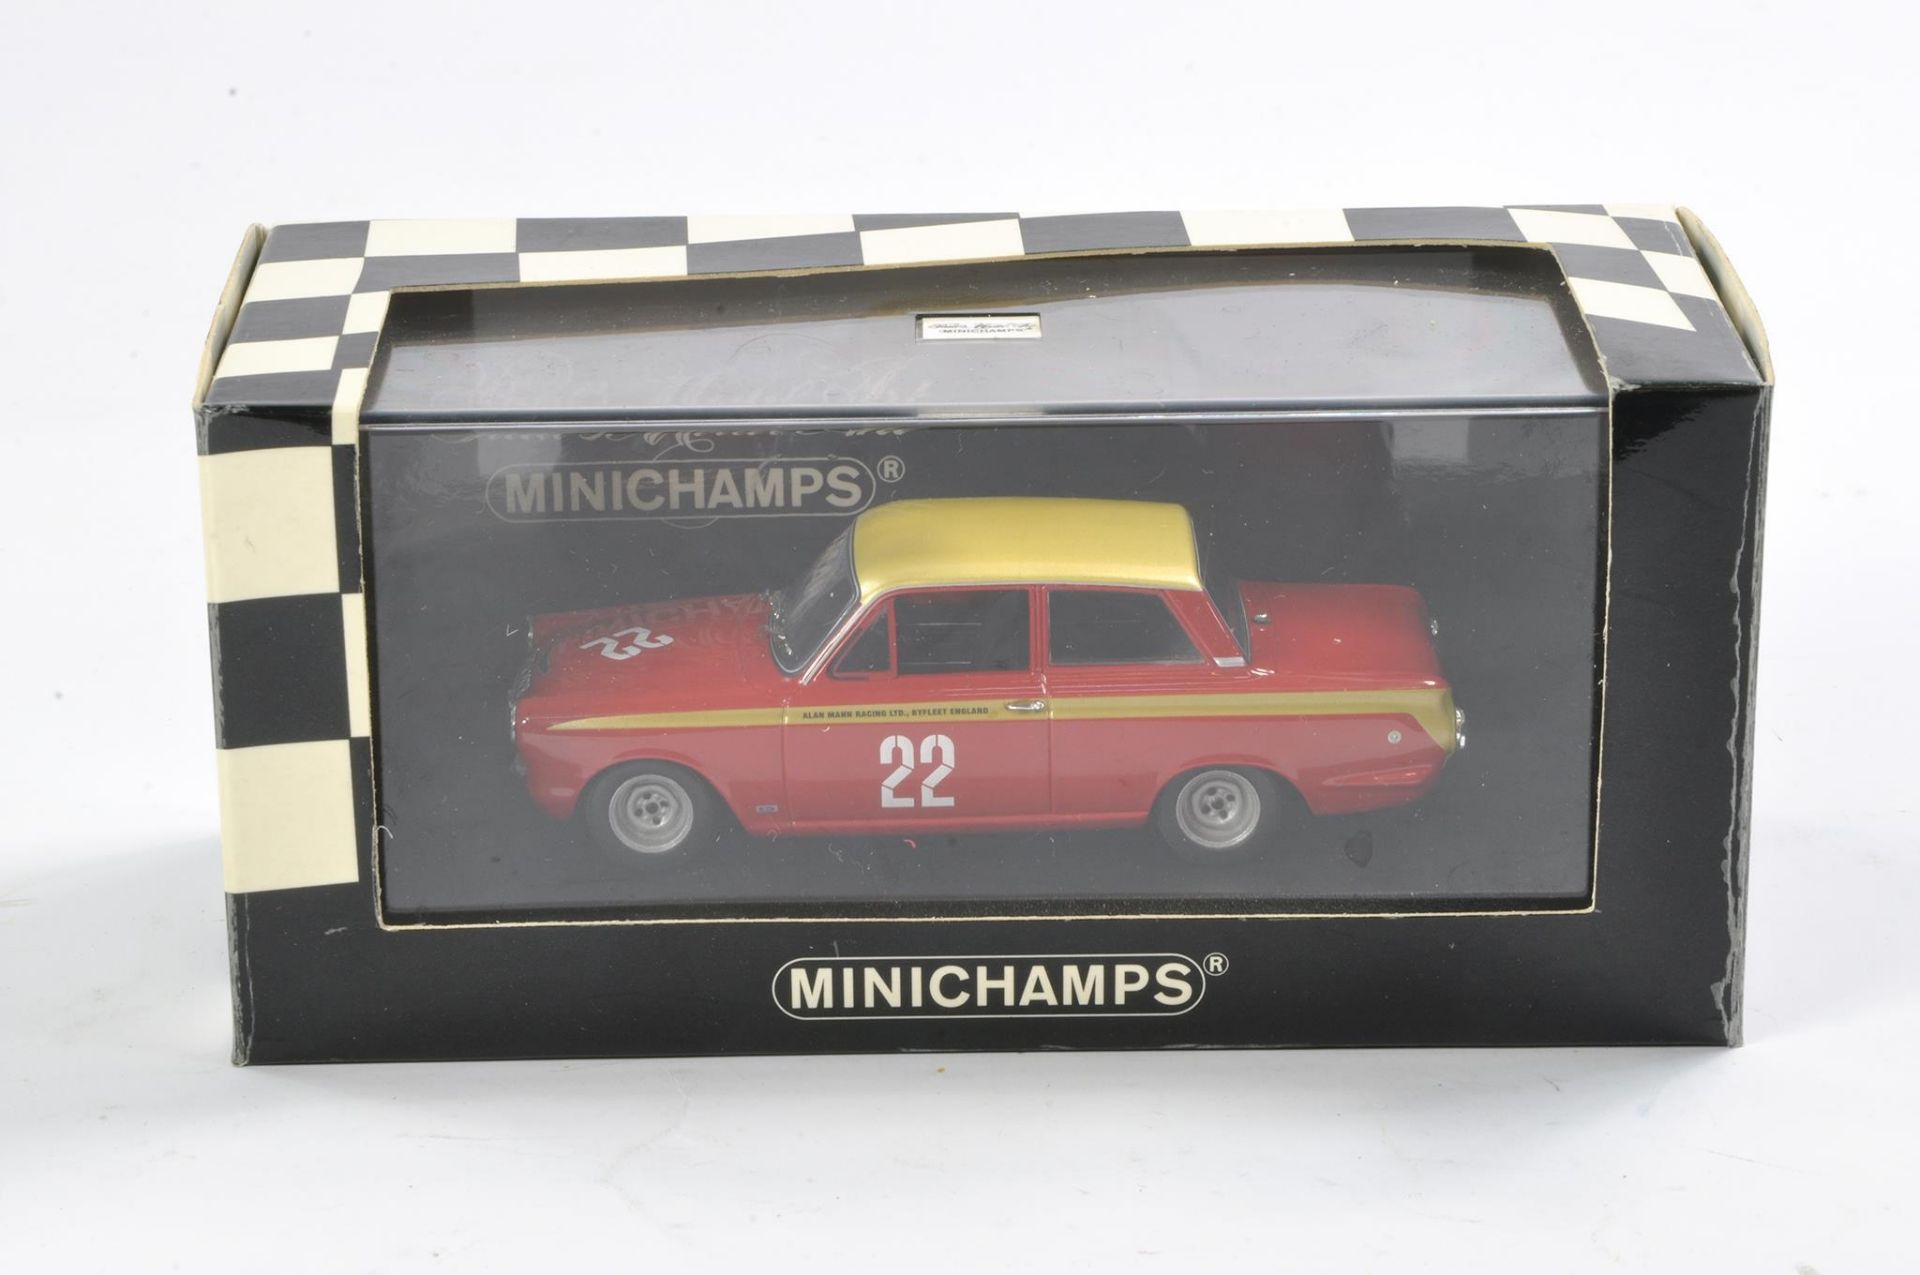 Minichamps Model Cars 1/43 Lotus Cortina Mk1. Limited Edition 1 of 2496. Excellent And Not